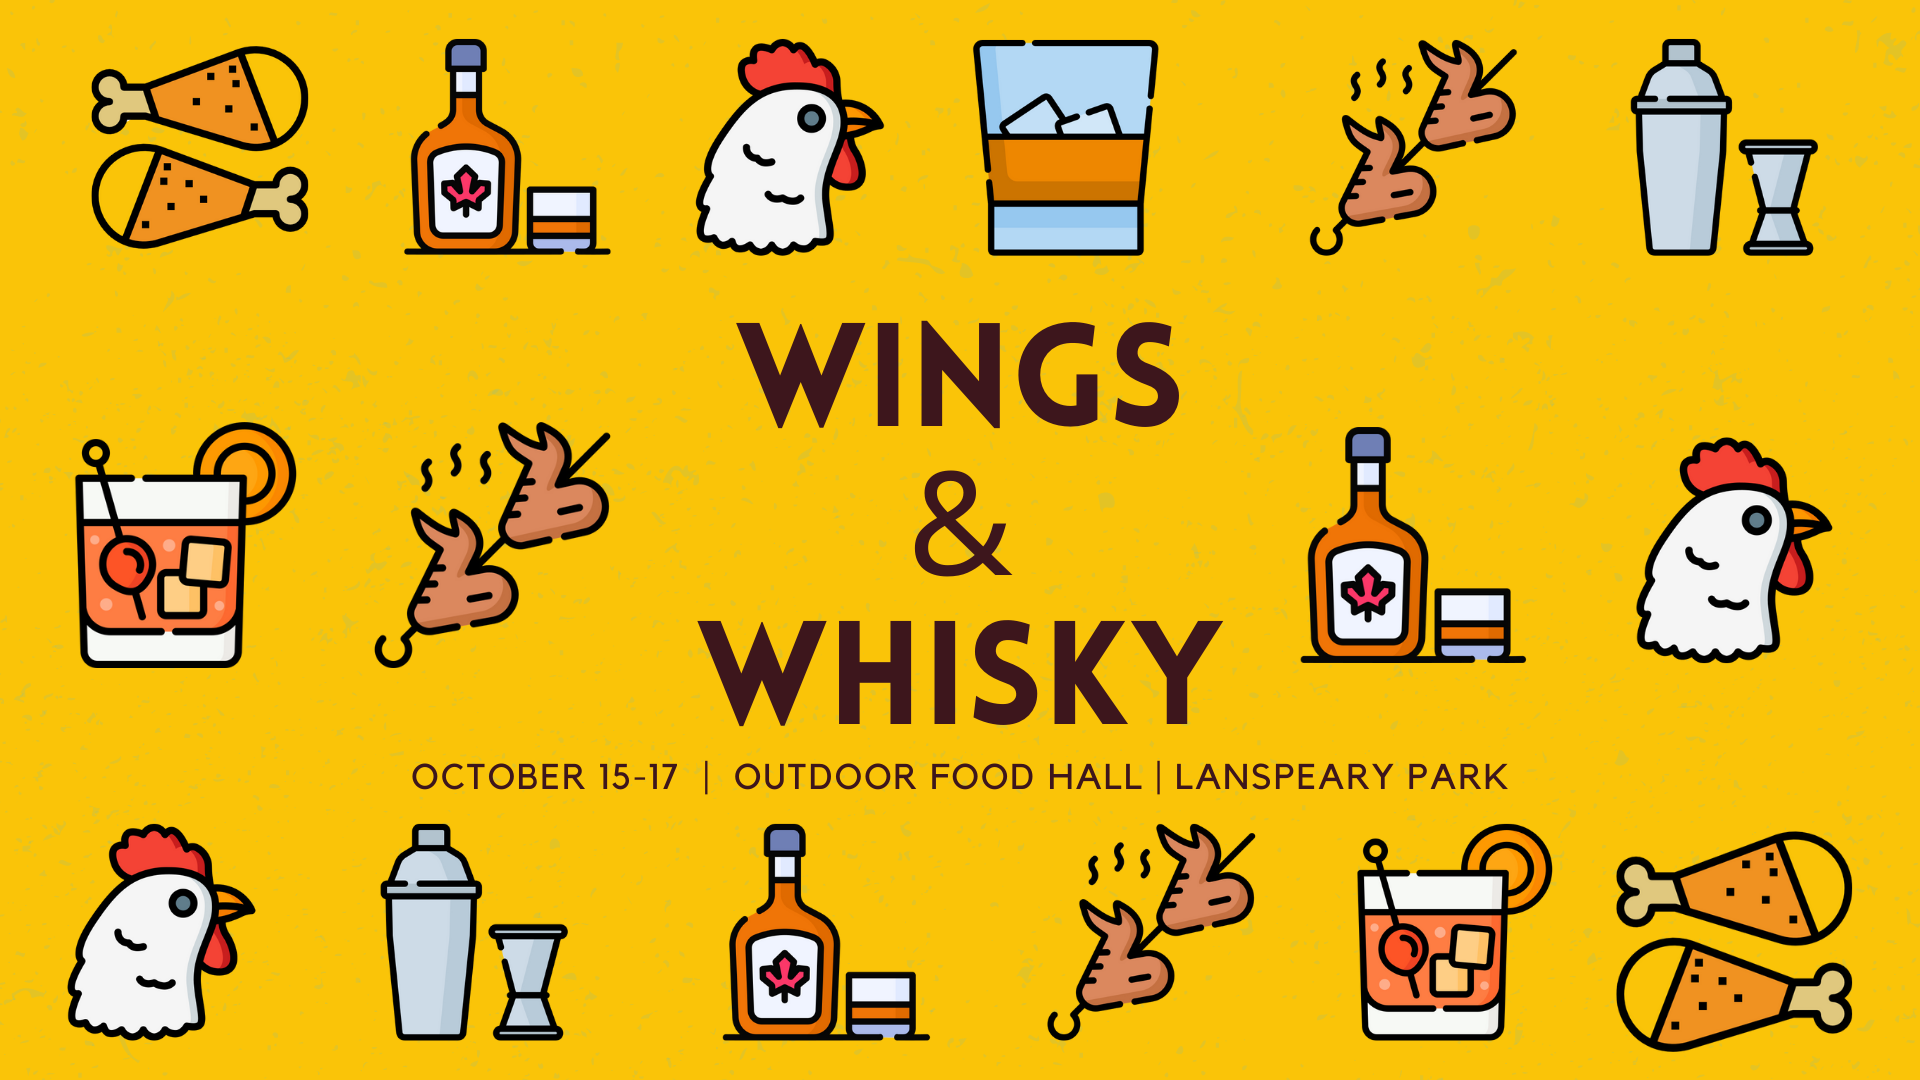 Wings & Whisky at the Outdoor Food Hall in Windsor, Ontario.